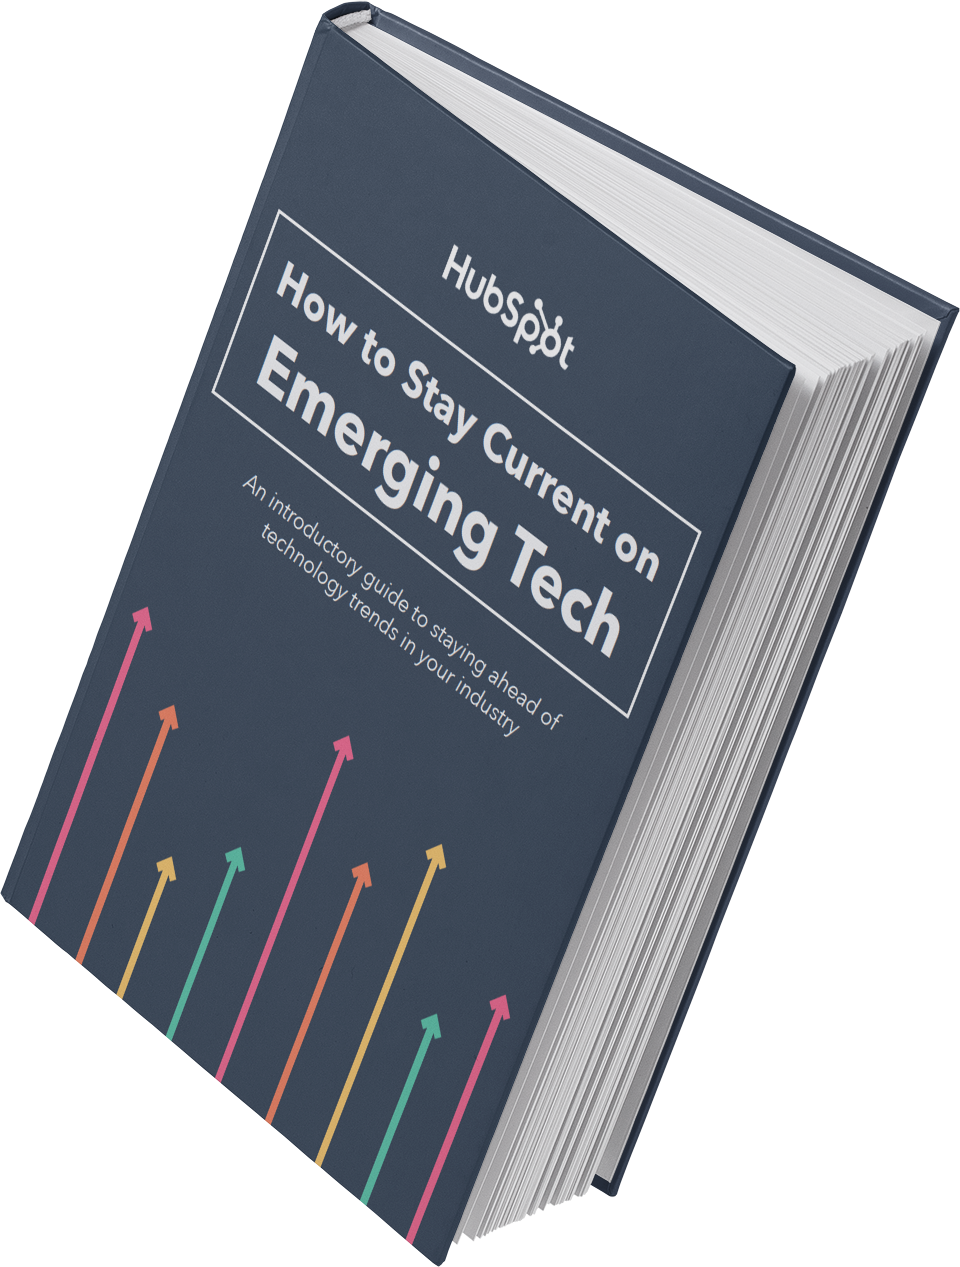 How to Stay Current on Emerging Tech